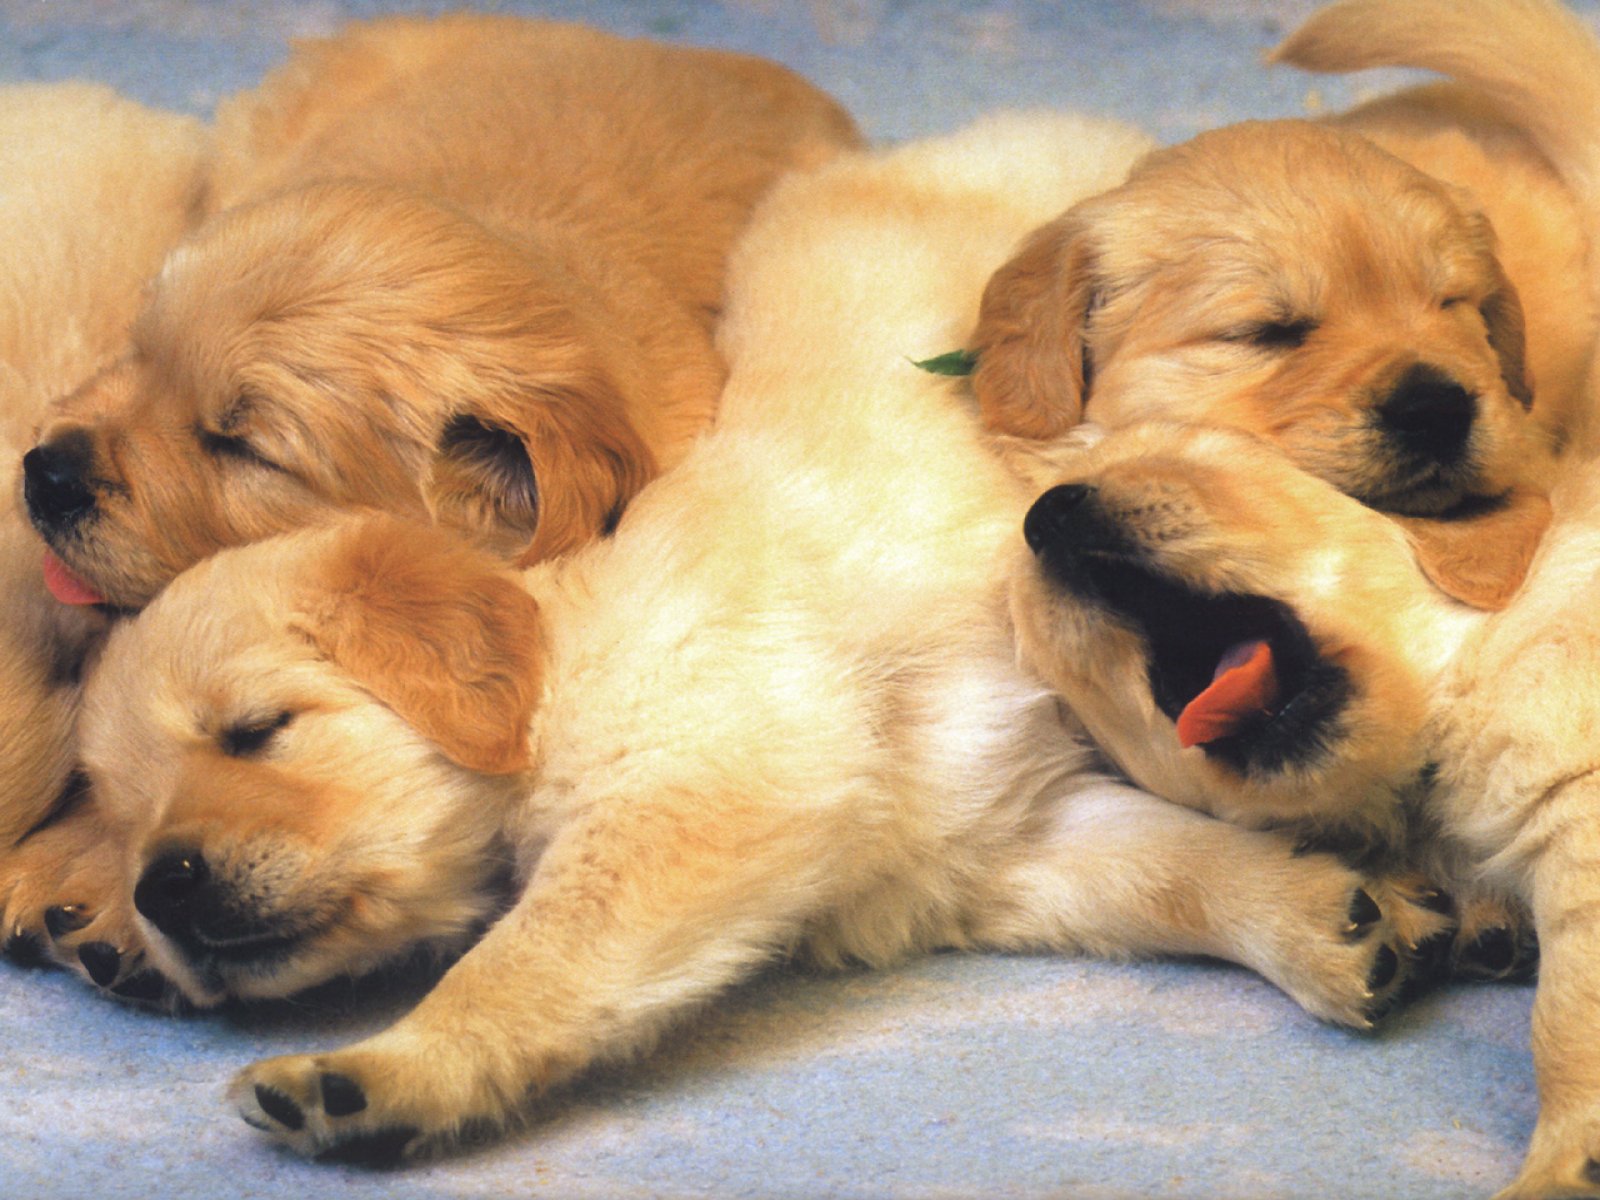 Free A Pile Of Puppies   free dog puppies wallpaper computer desktop